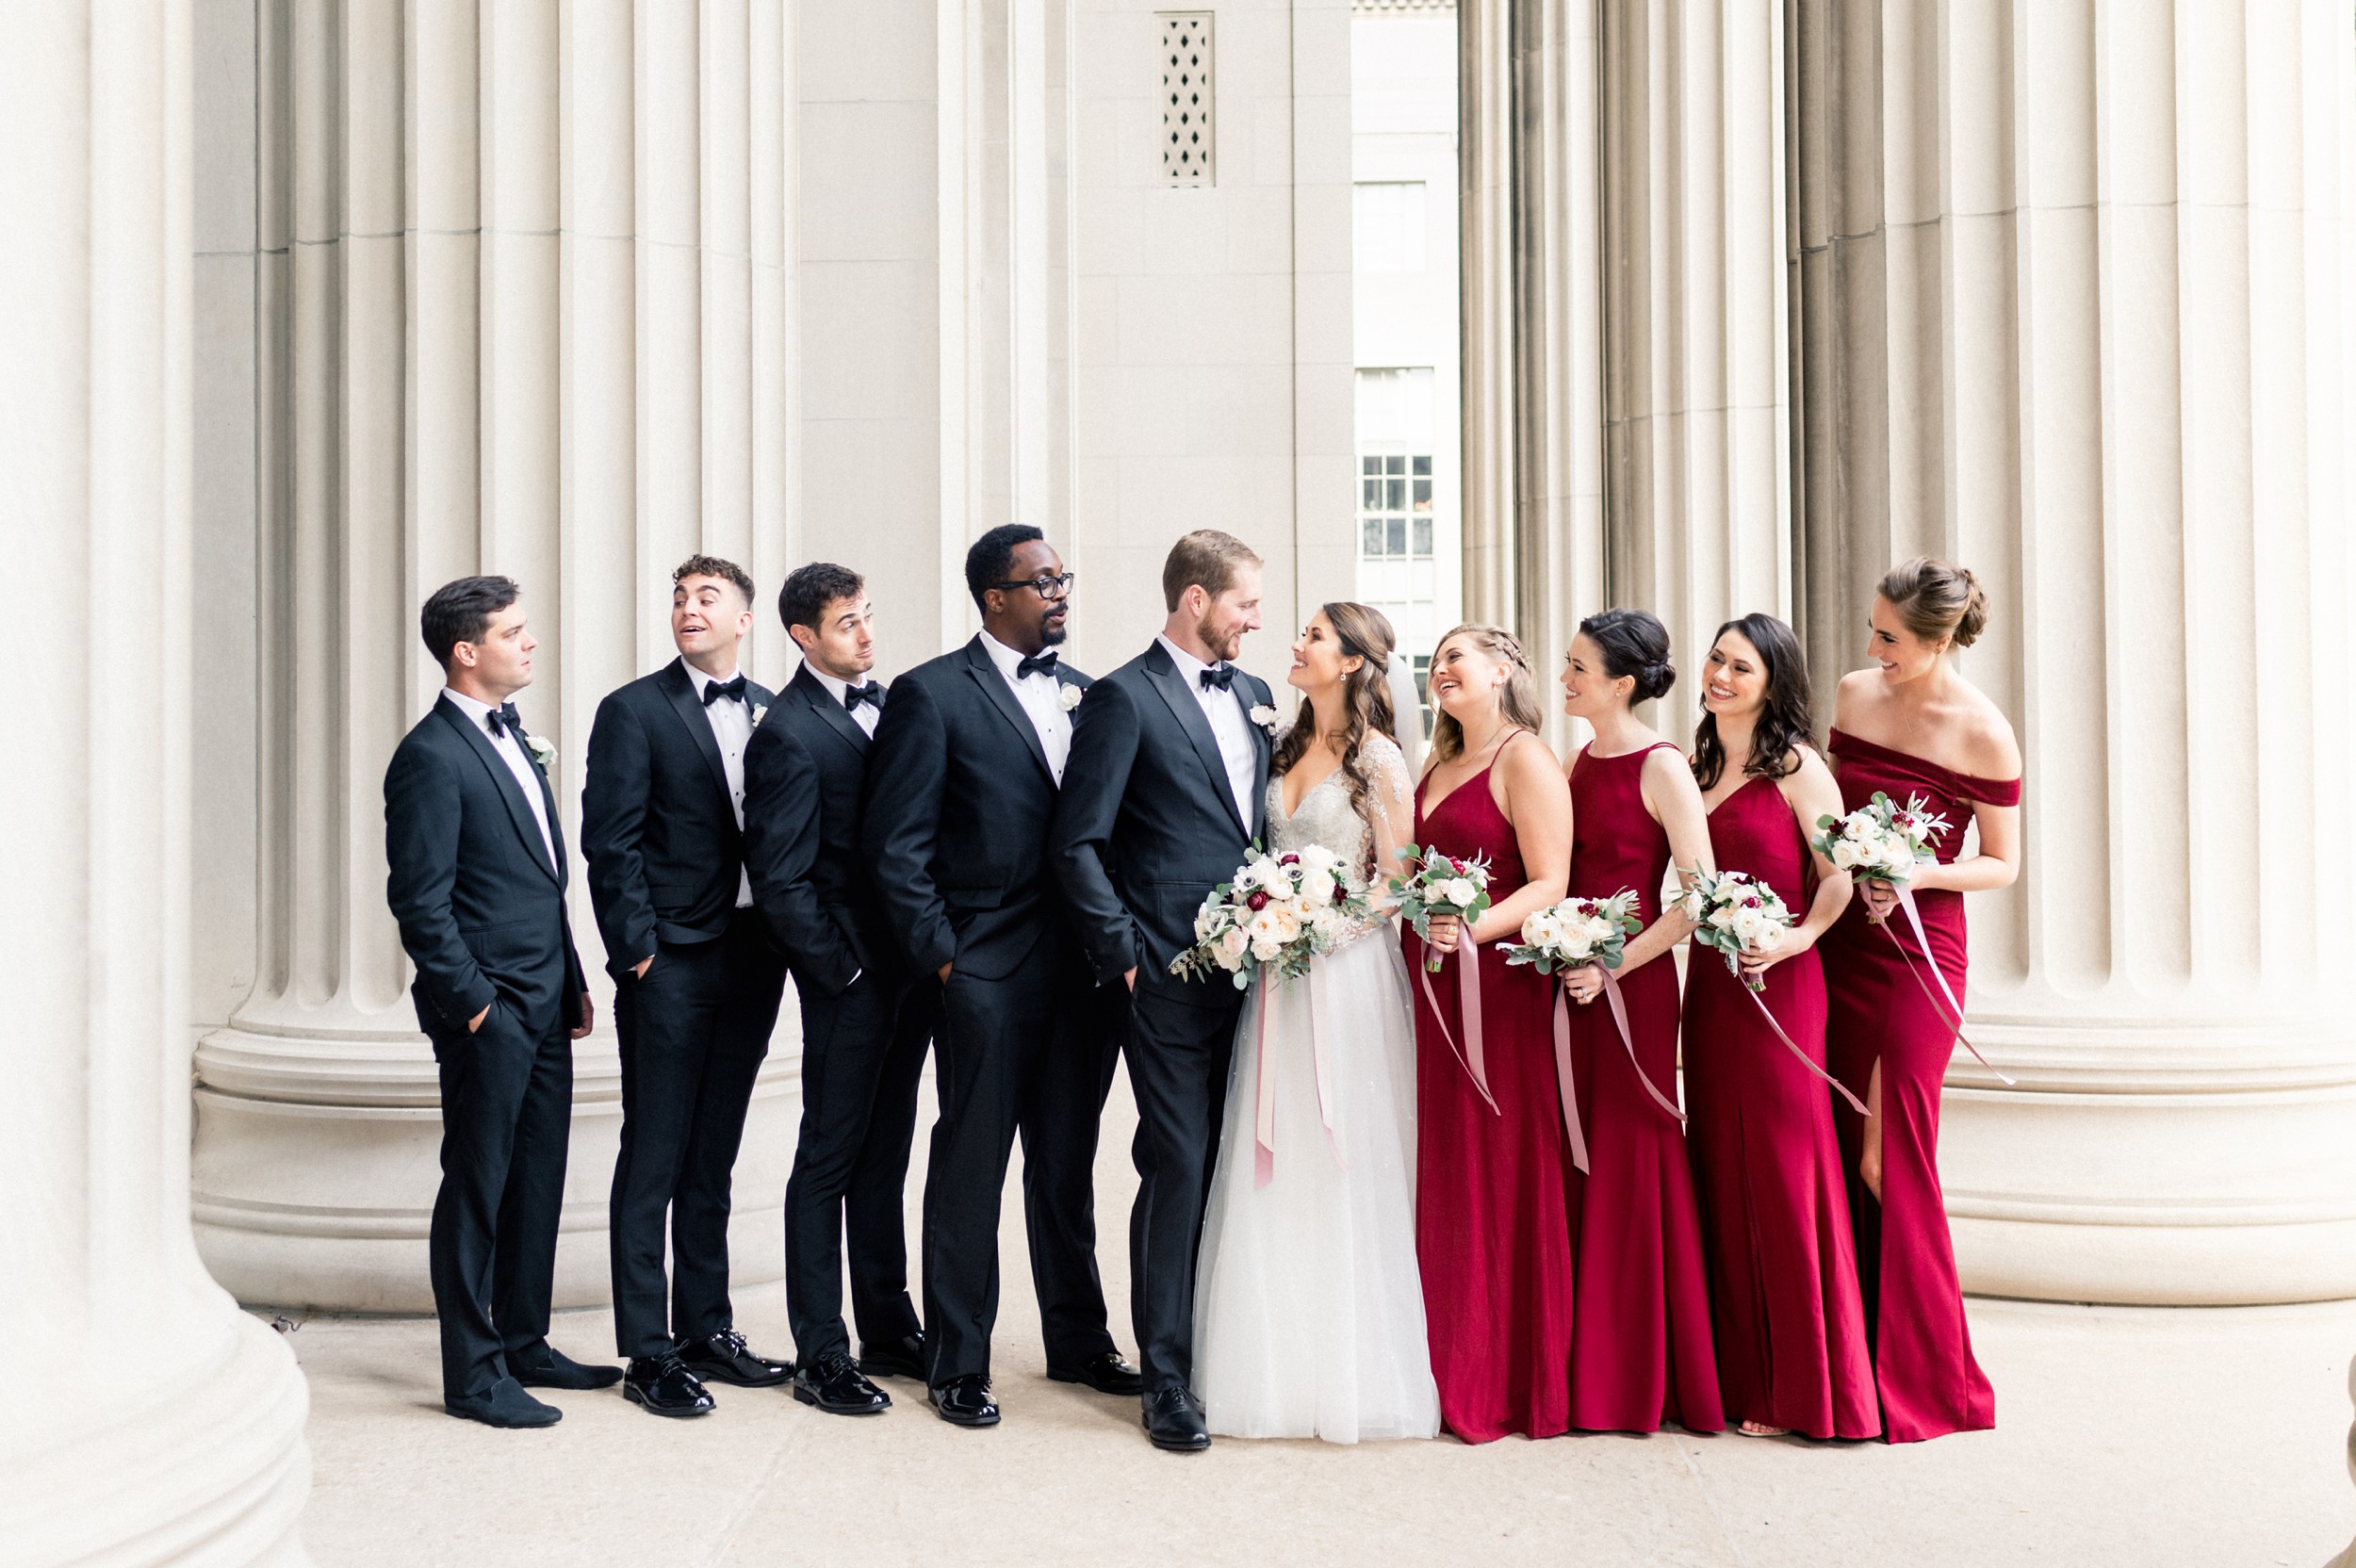 fall wedding at Harvard art museum bridal party in cranberry dresses and tuxedos